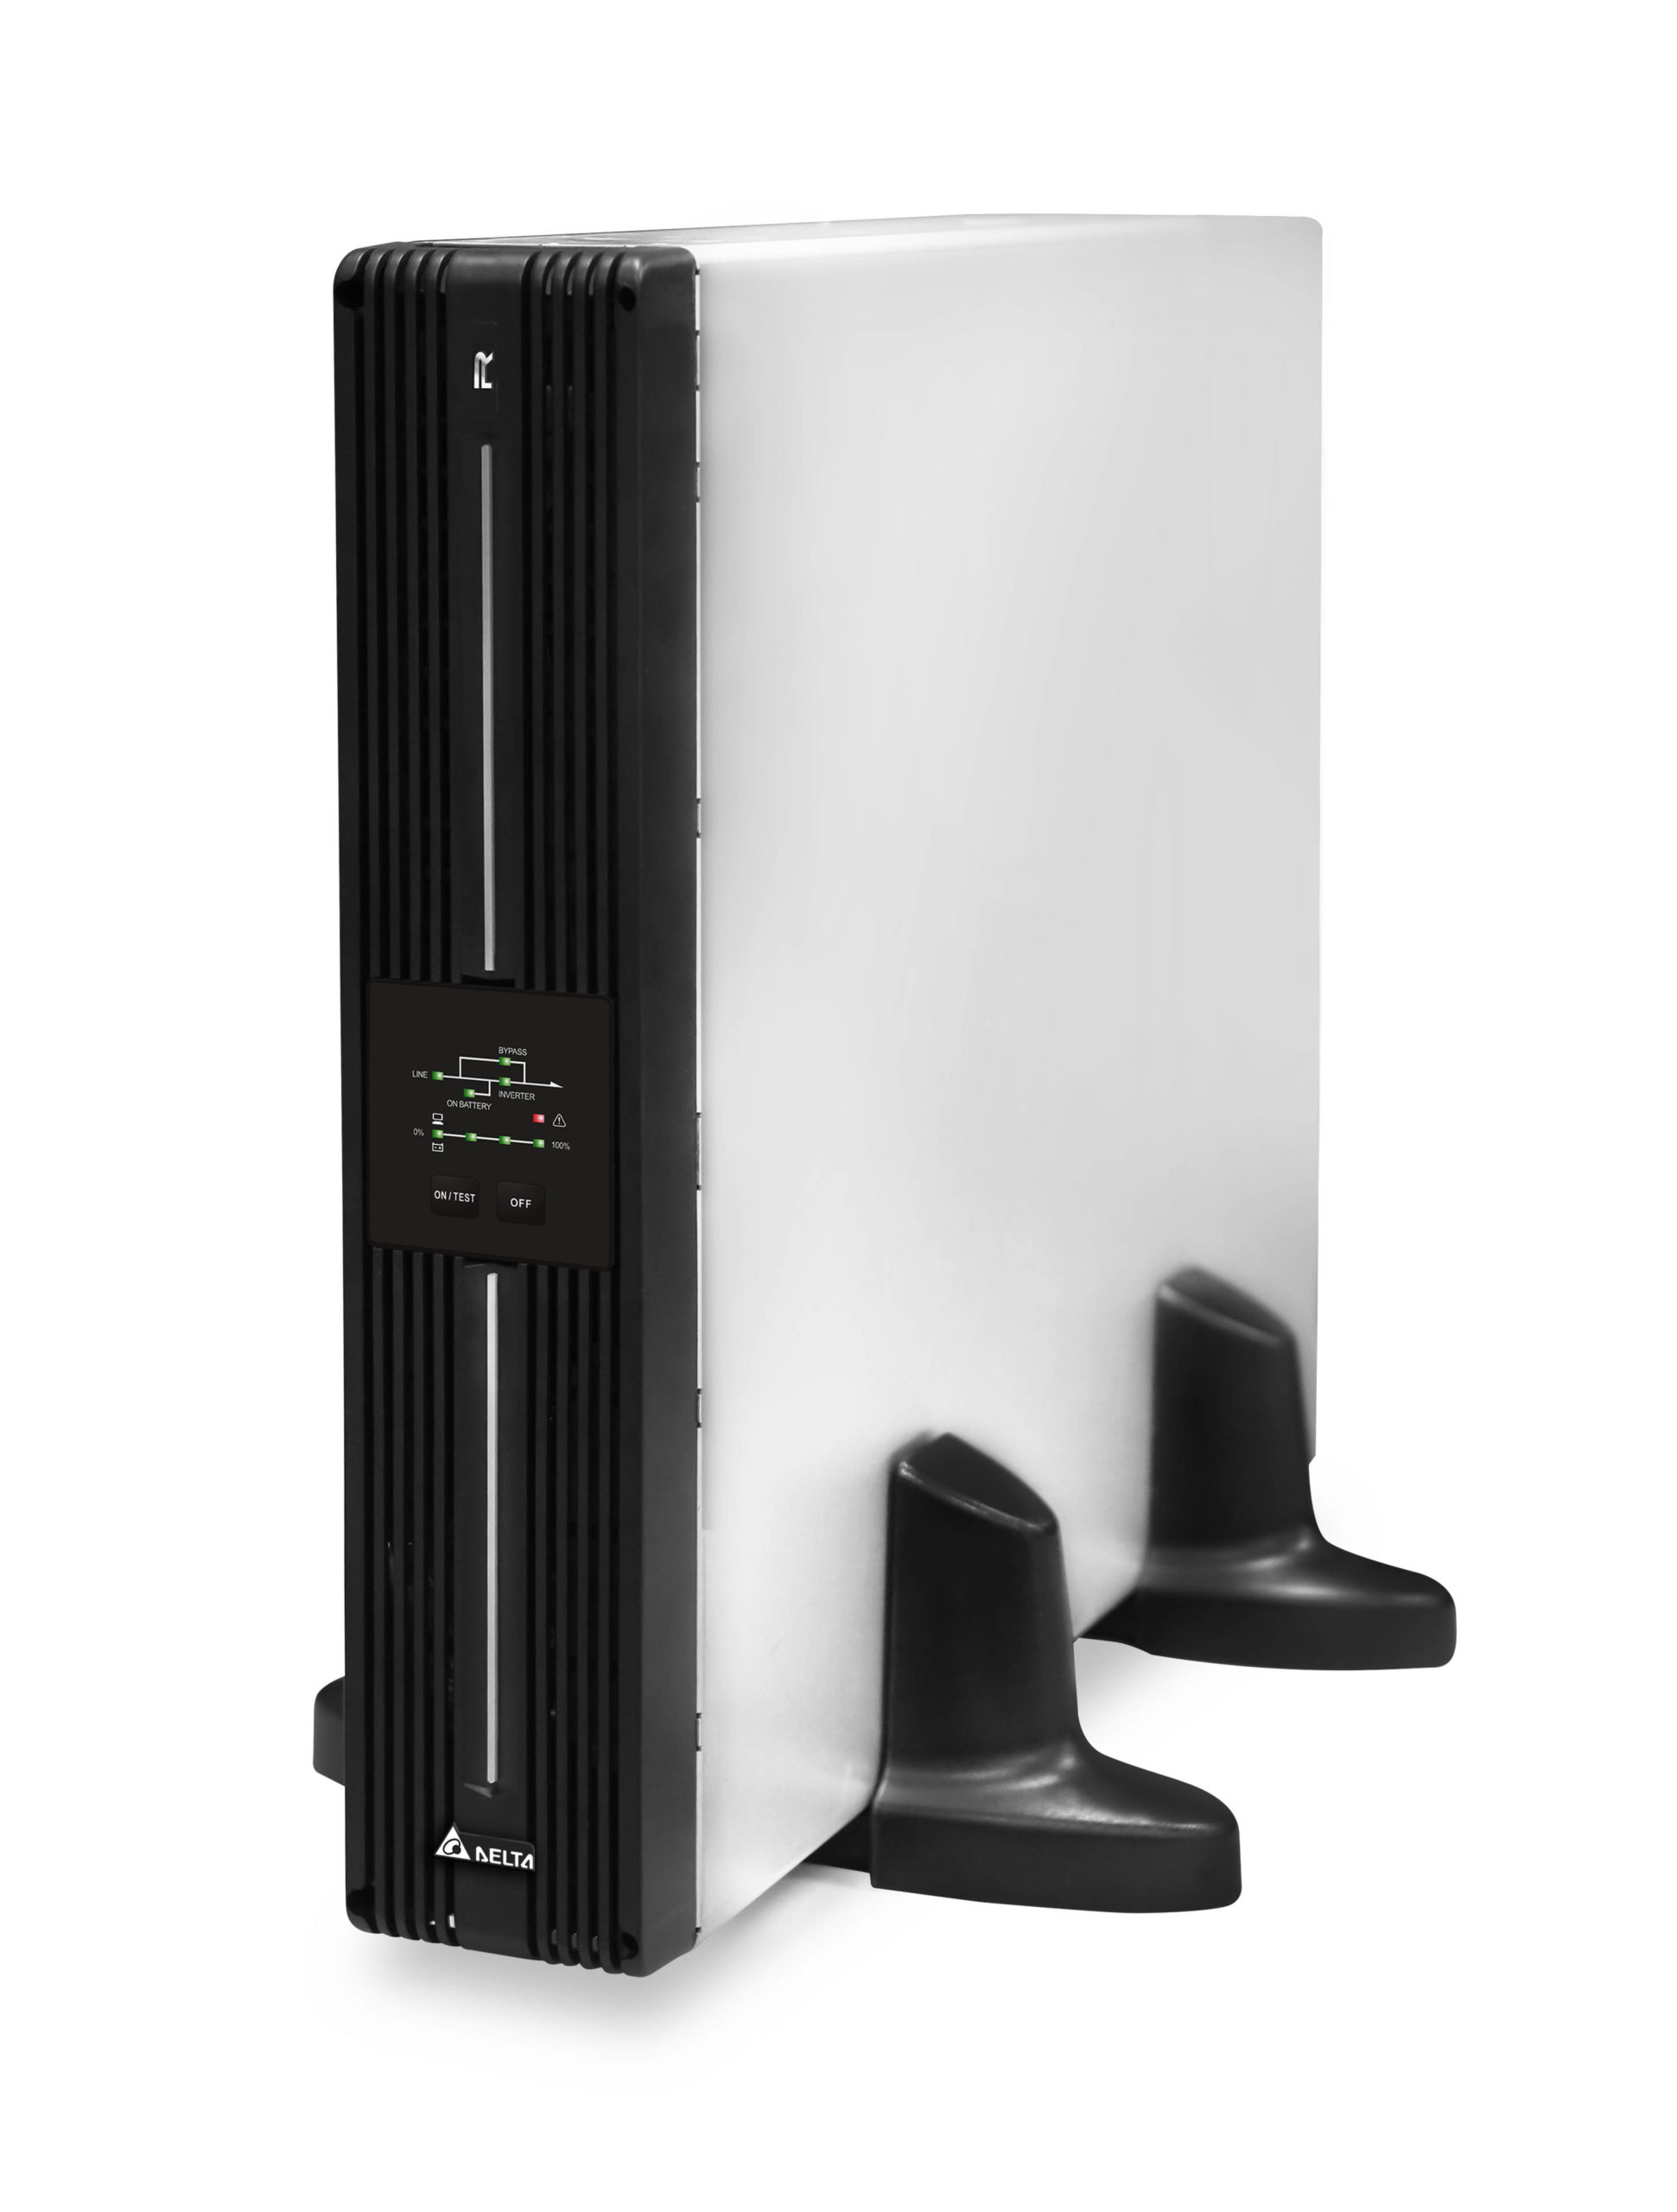 Product Image_R_LED_Tower_Side